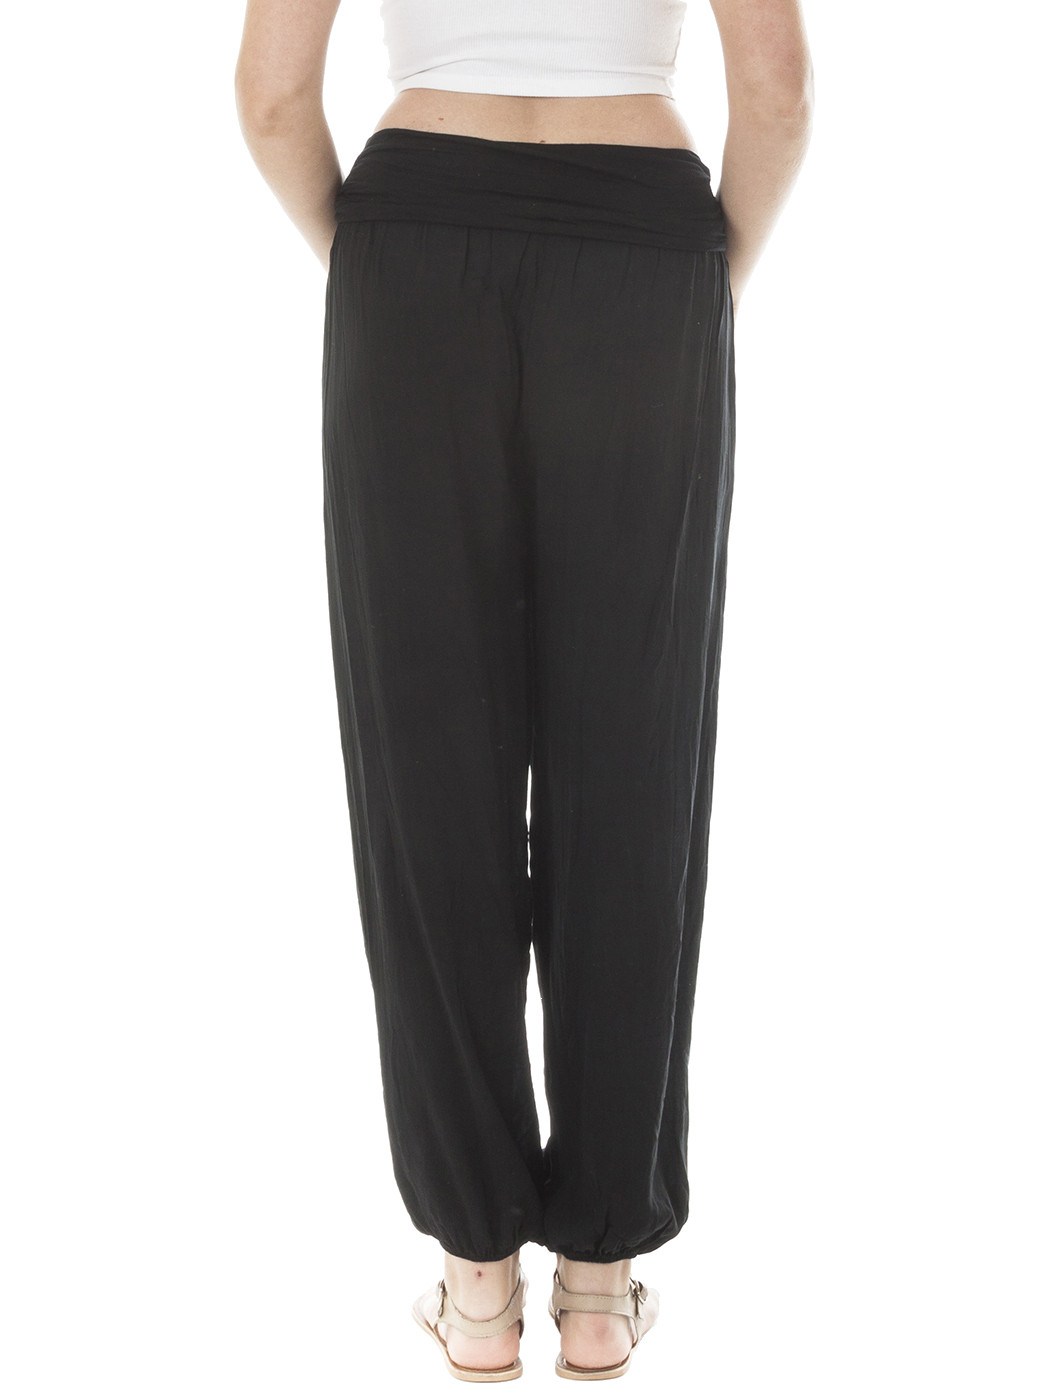 New Womens Italian Lagenlook Baggy Flowy Stretchy Harem Pants Trousers ...